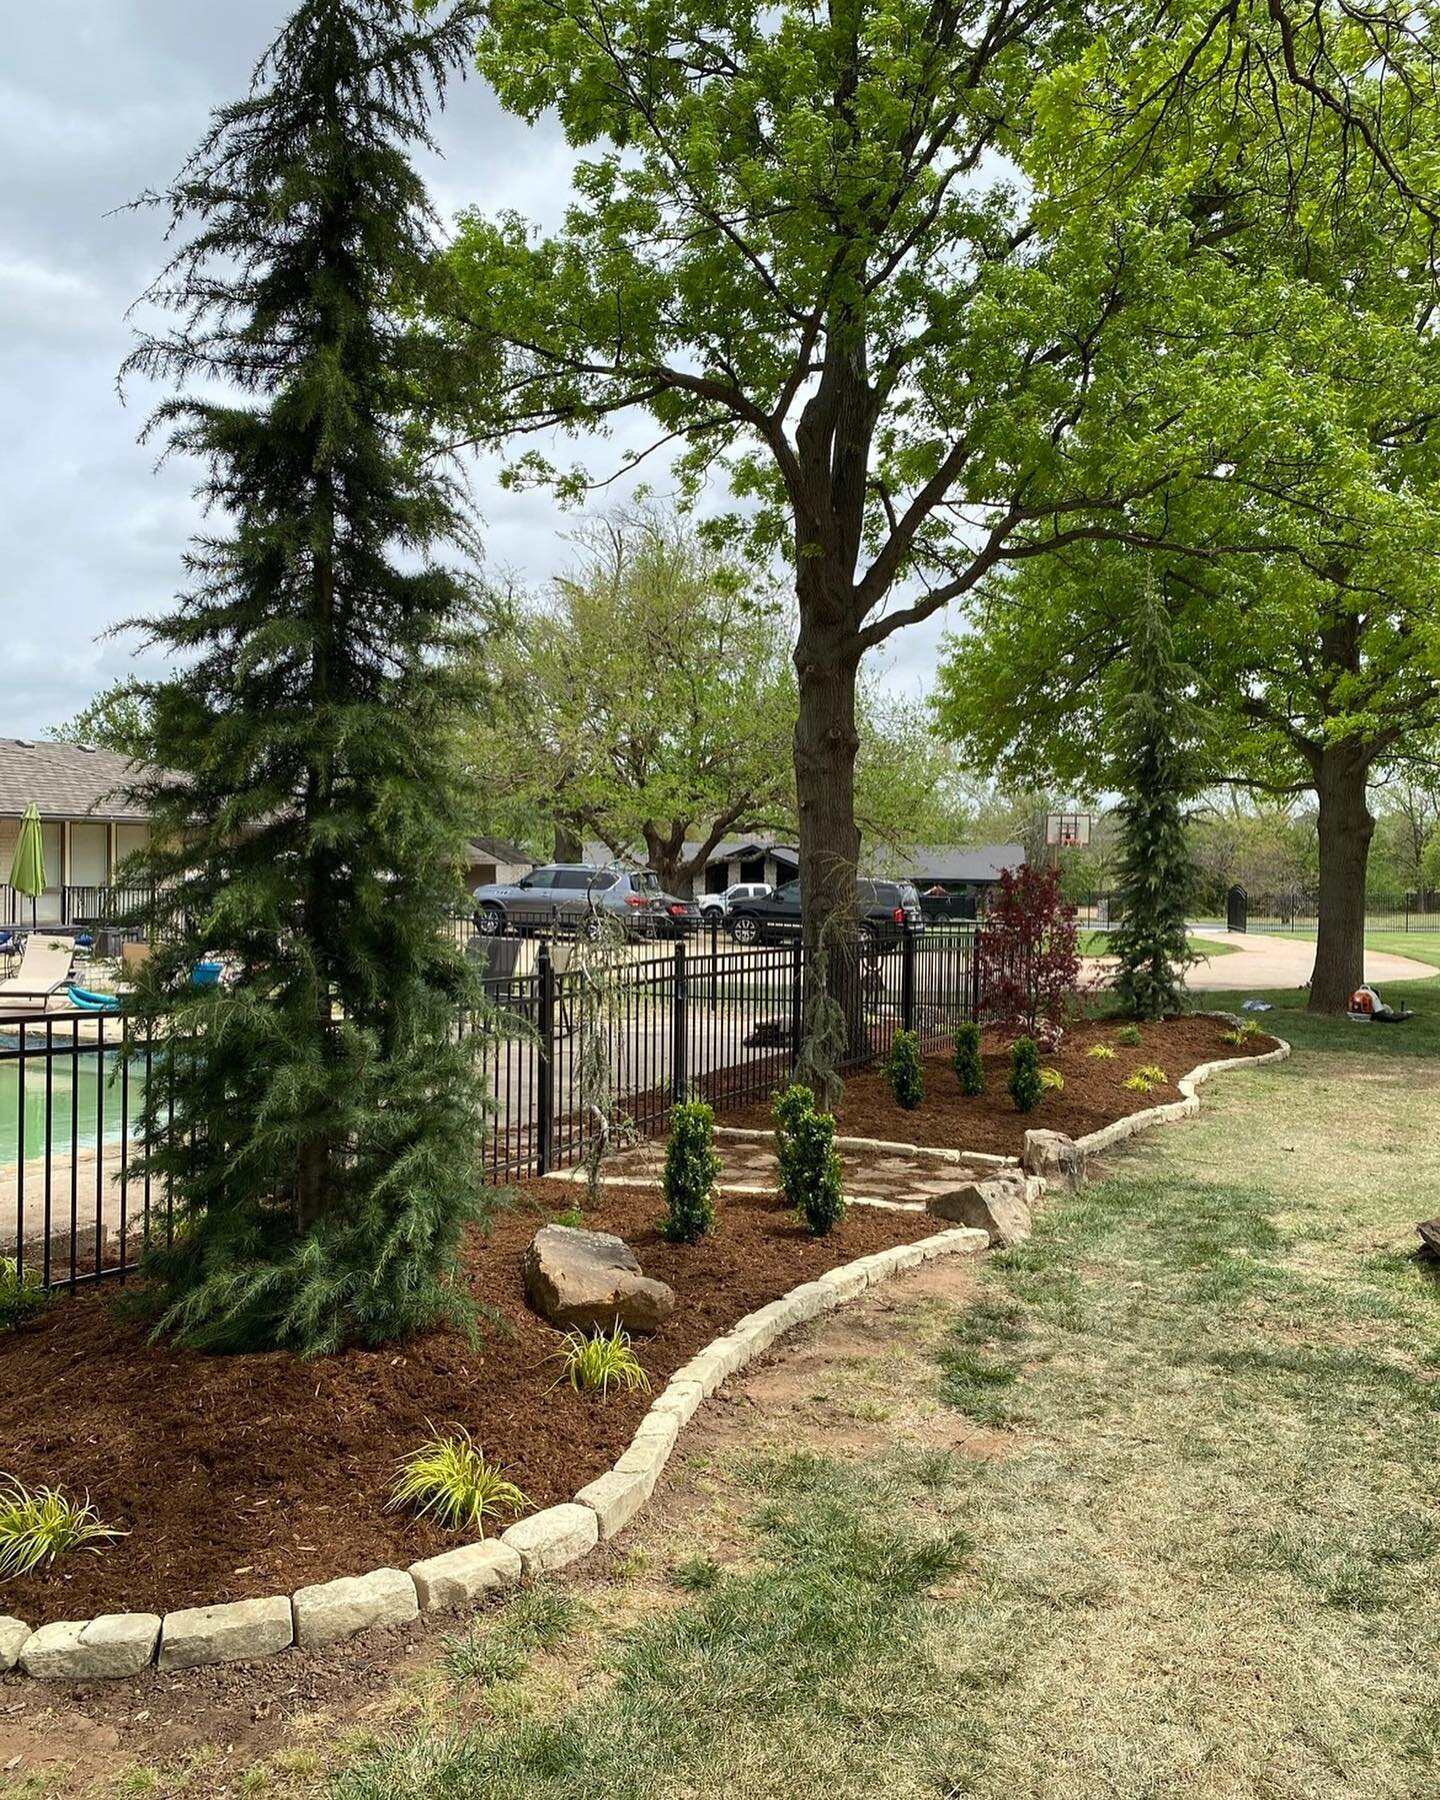 🌳✨Spring is just around the corner! Our team at Gray&rsquo;s Landscaping can help you create a stunning atmosphere for family and friends to enjoy. Call us at 405-219-0047 to get your journey started!✨🌳